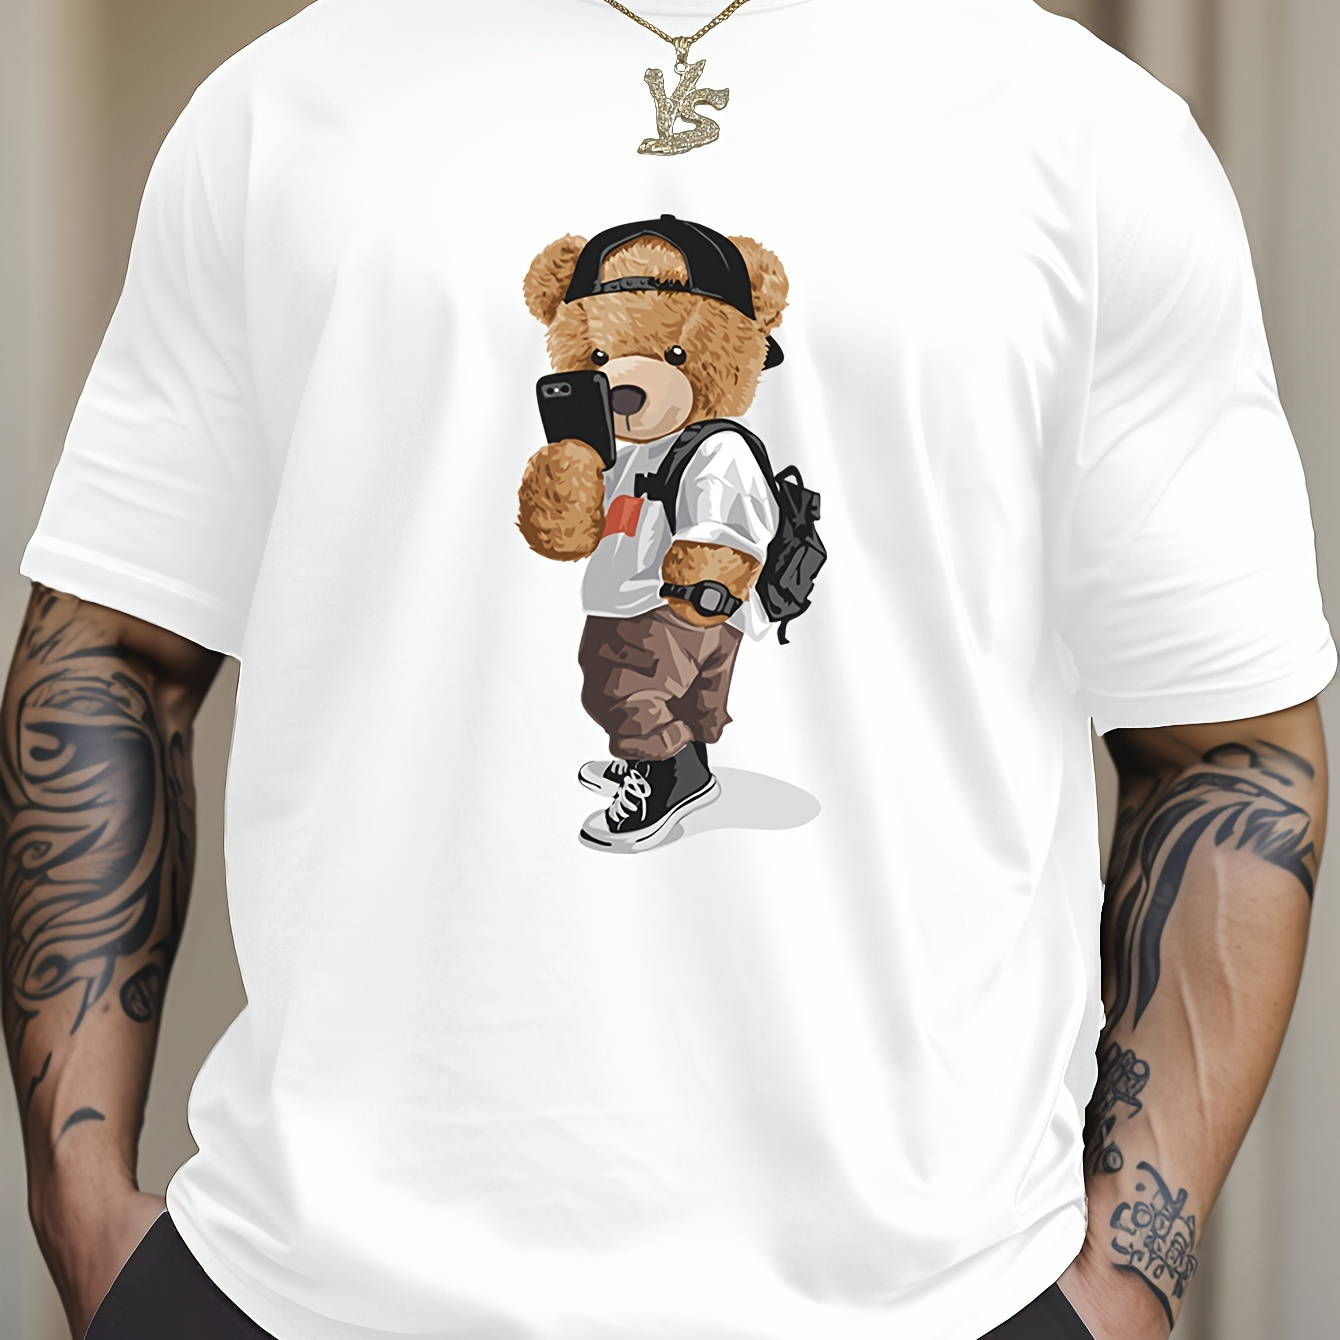 

Cartoon Teddy Bear Print, Men's Graphic Design Crew Neck T-shirt, Casual Comfy Tees Tshirts For Summer, Men's Clothing Tops For Daily Vacation Resorts